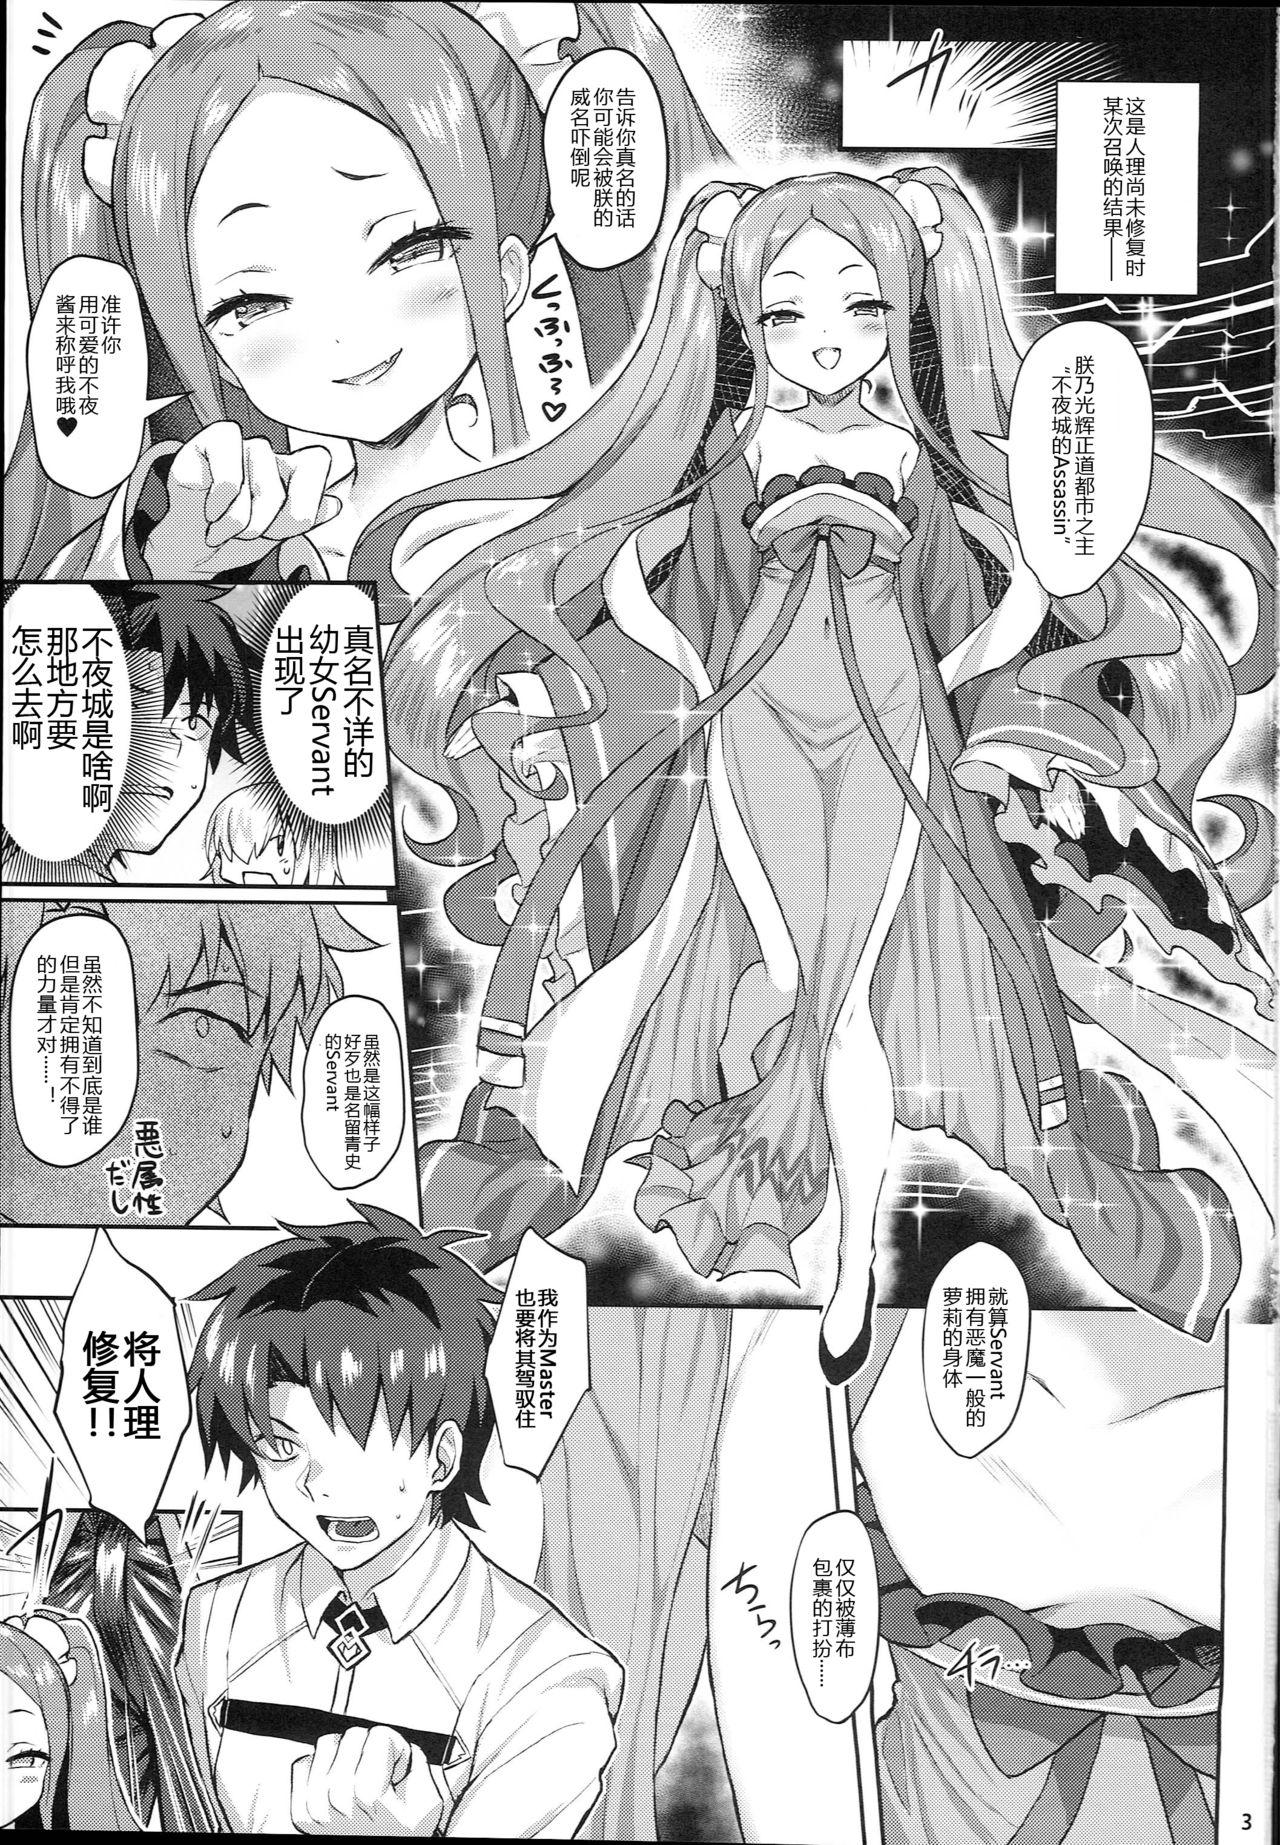 Amante Fuya Syndrome - Sleepless Syndrome - Fate grand order Mom - Page 4